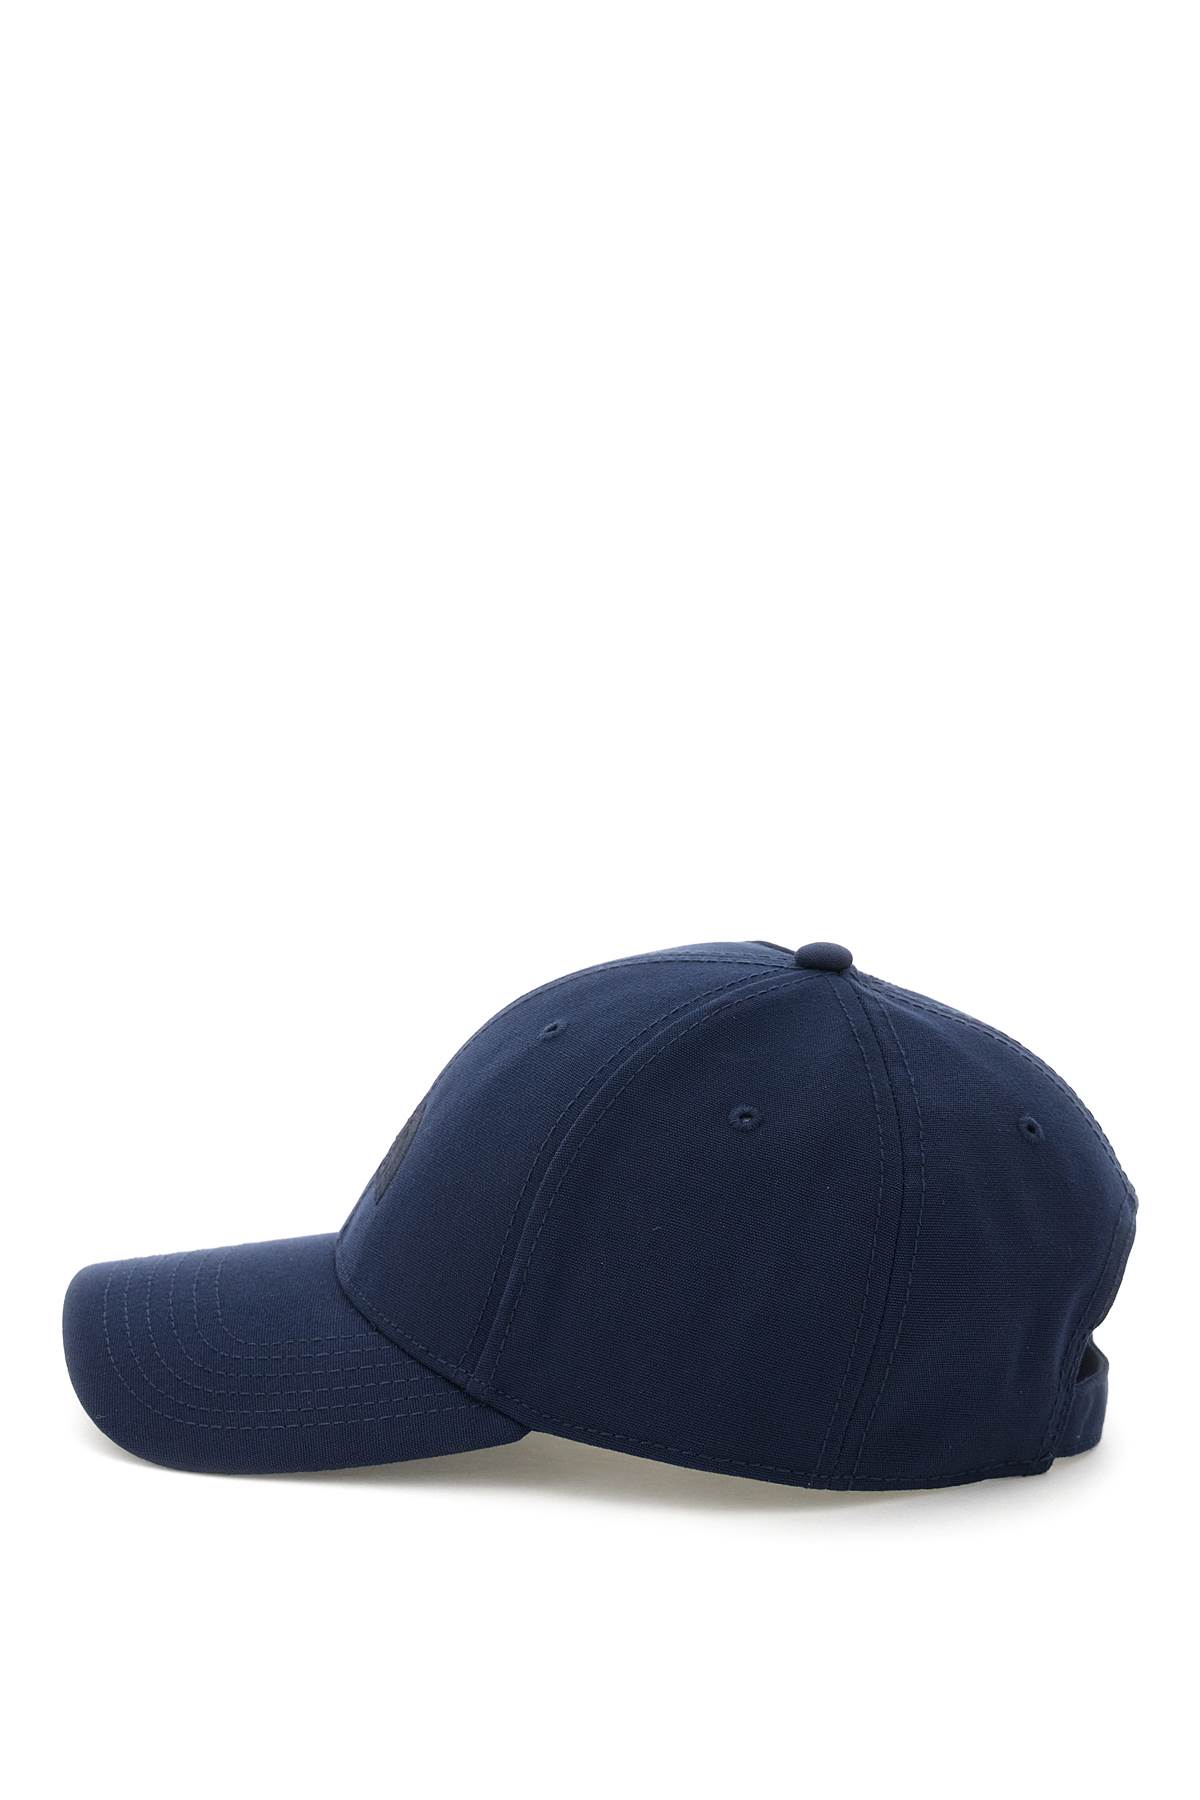 The North Face Navy Cap In (blue) Summit 66 | ModeSens Baseball Classic